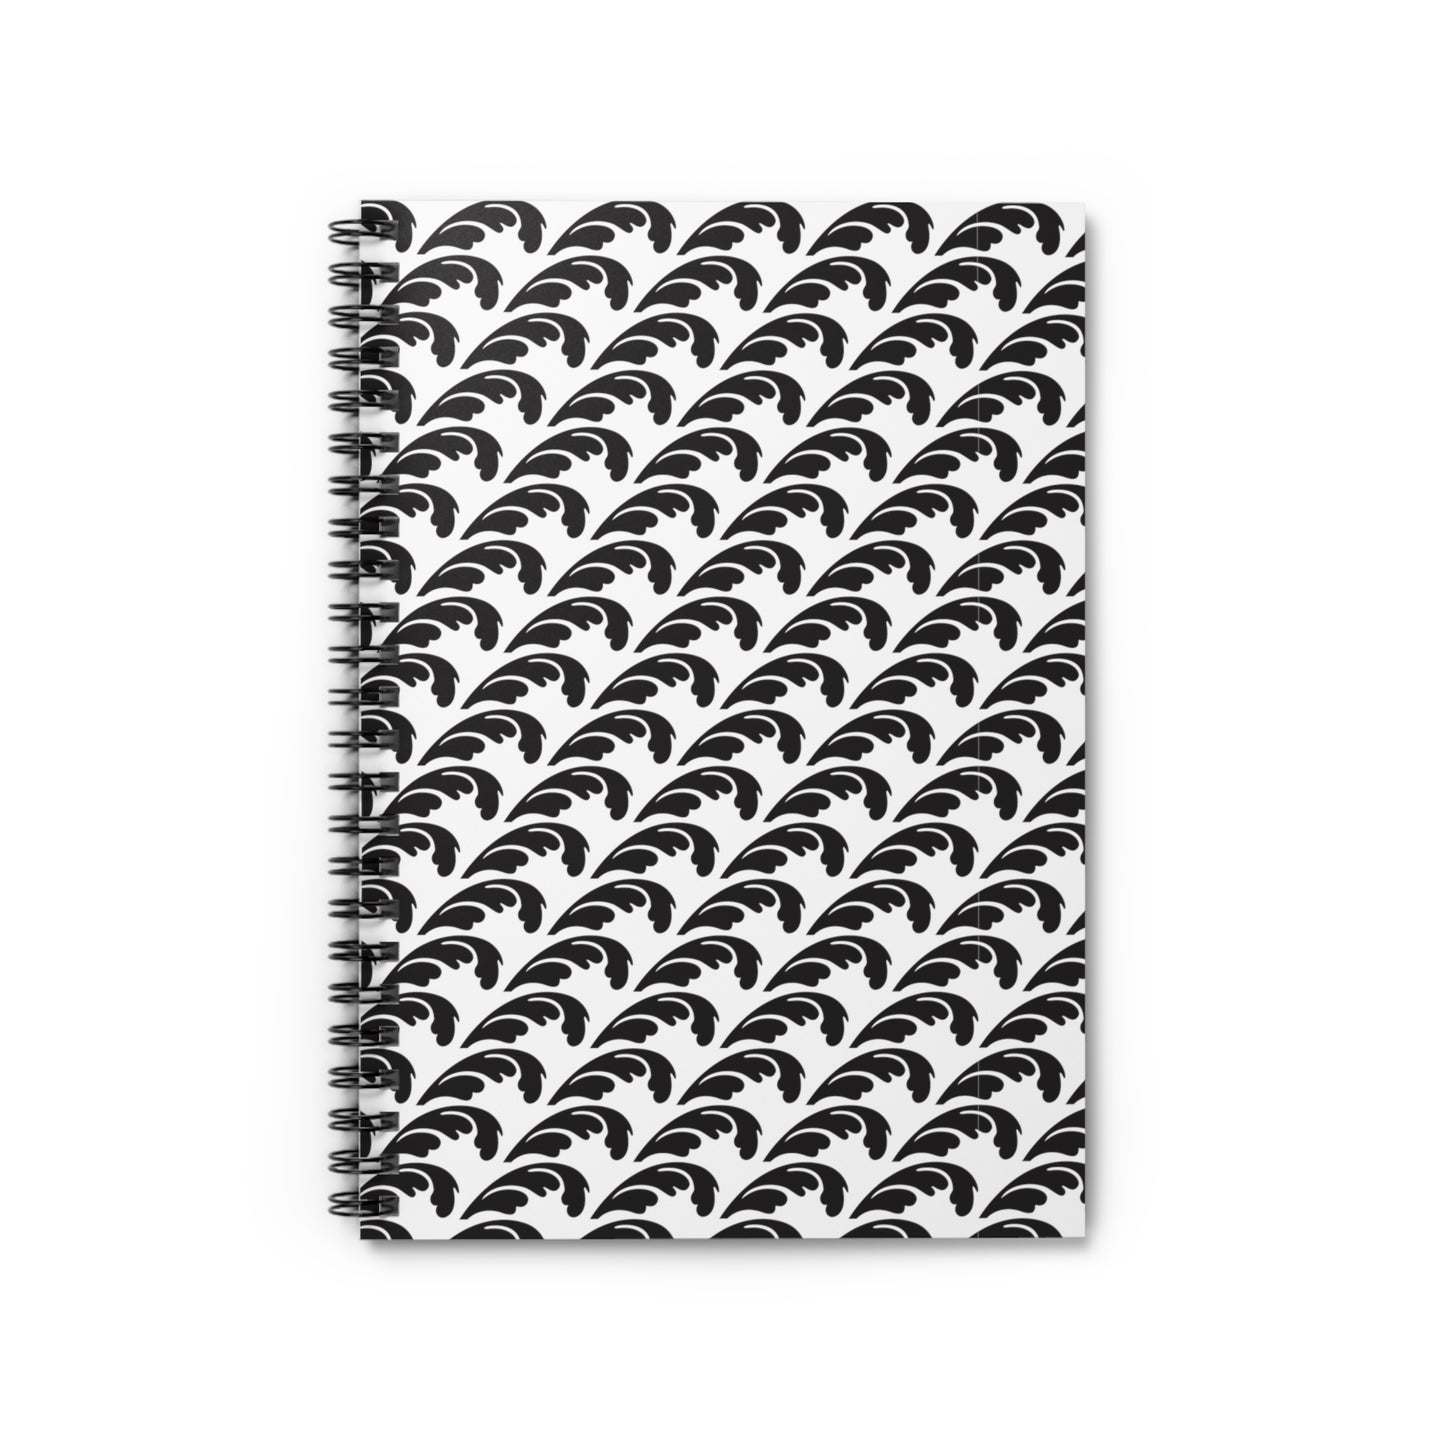 Beautiful Beloved One - Spiral Notebook - Ruled Line- black/white